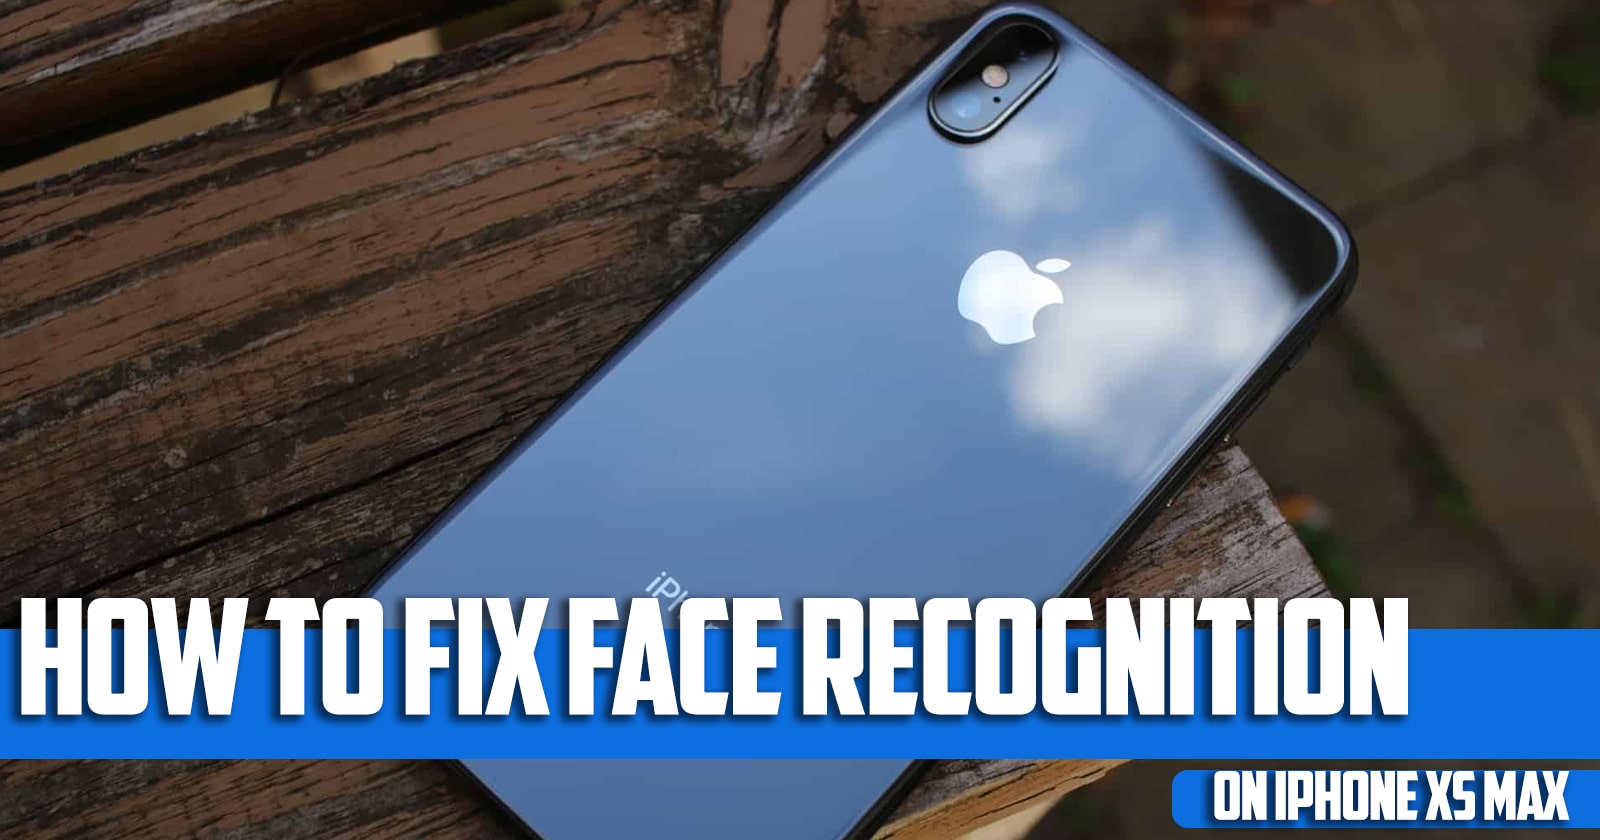 How to Fix Face Recognition on iPhone XS Max